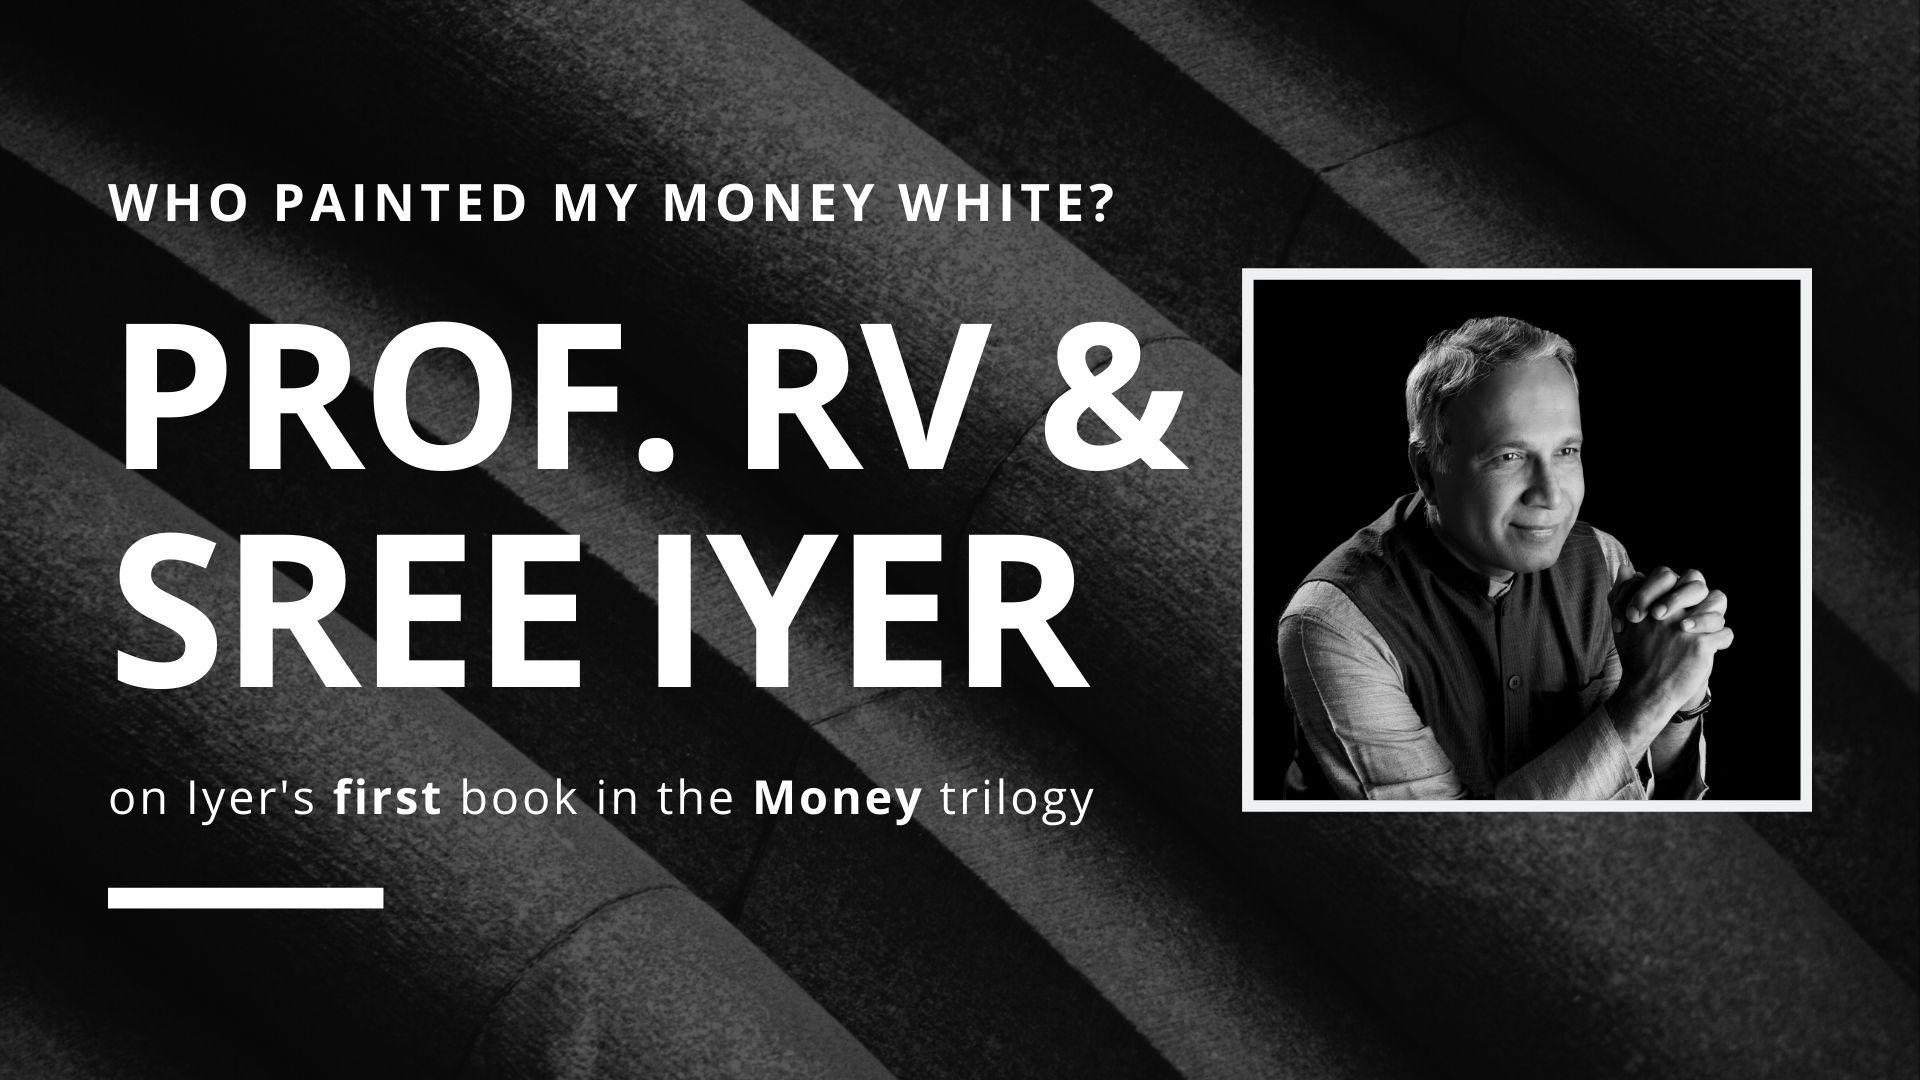 Sree Iyer says, "Do the math. Each container that carried counterfeit currency with 500- and 1000-rupee notes was worth 5000 crores. How many actually arrived? Was this the reason new notes had a different dimension? How was this money used?"